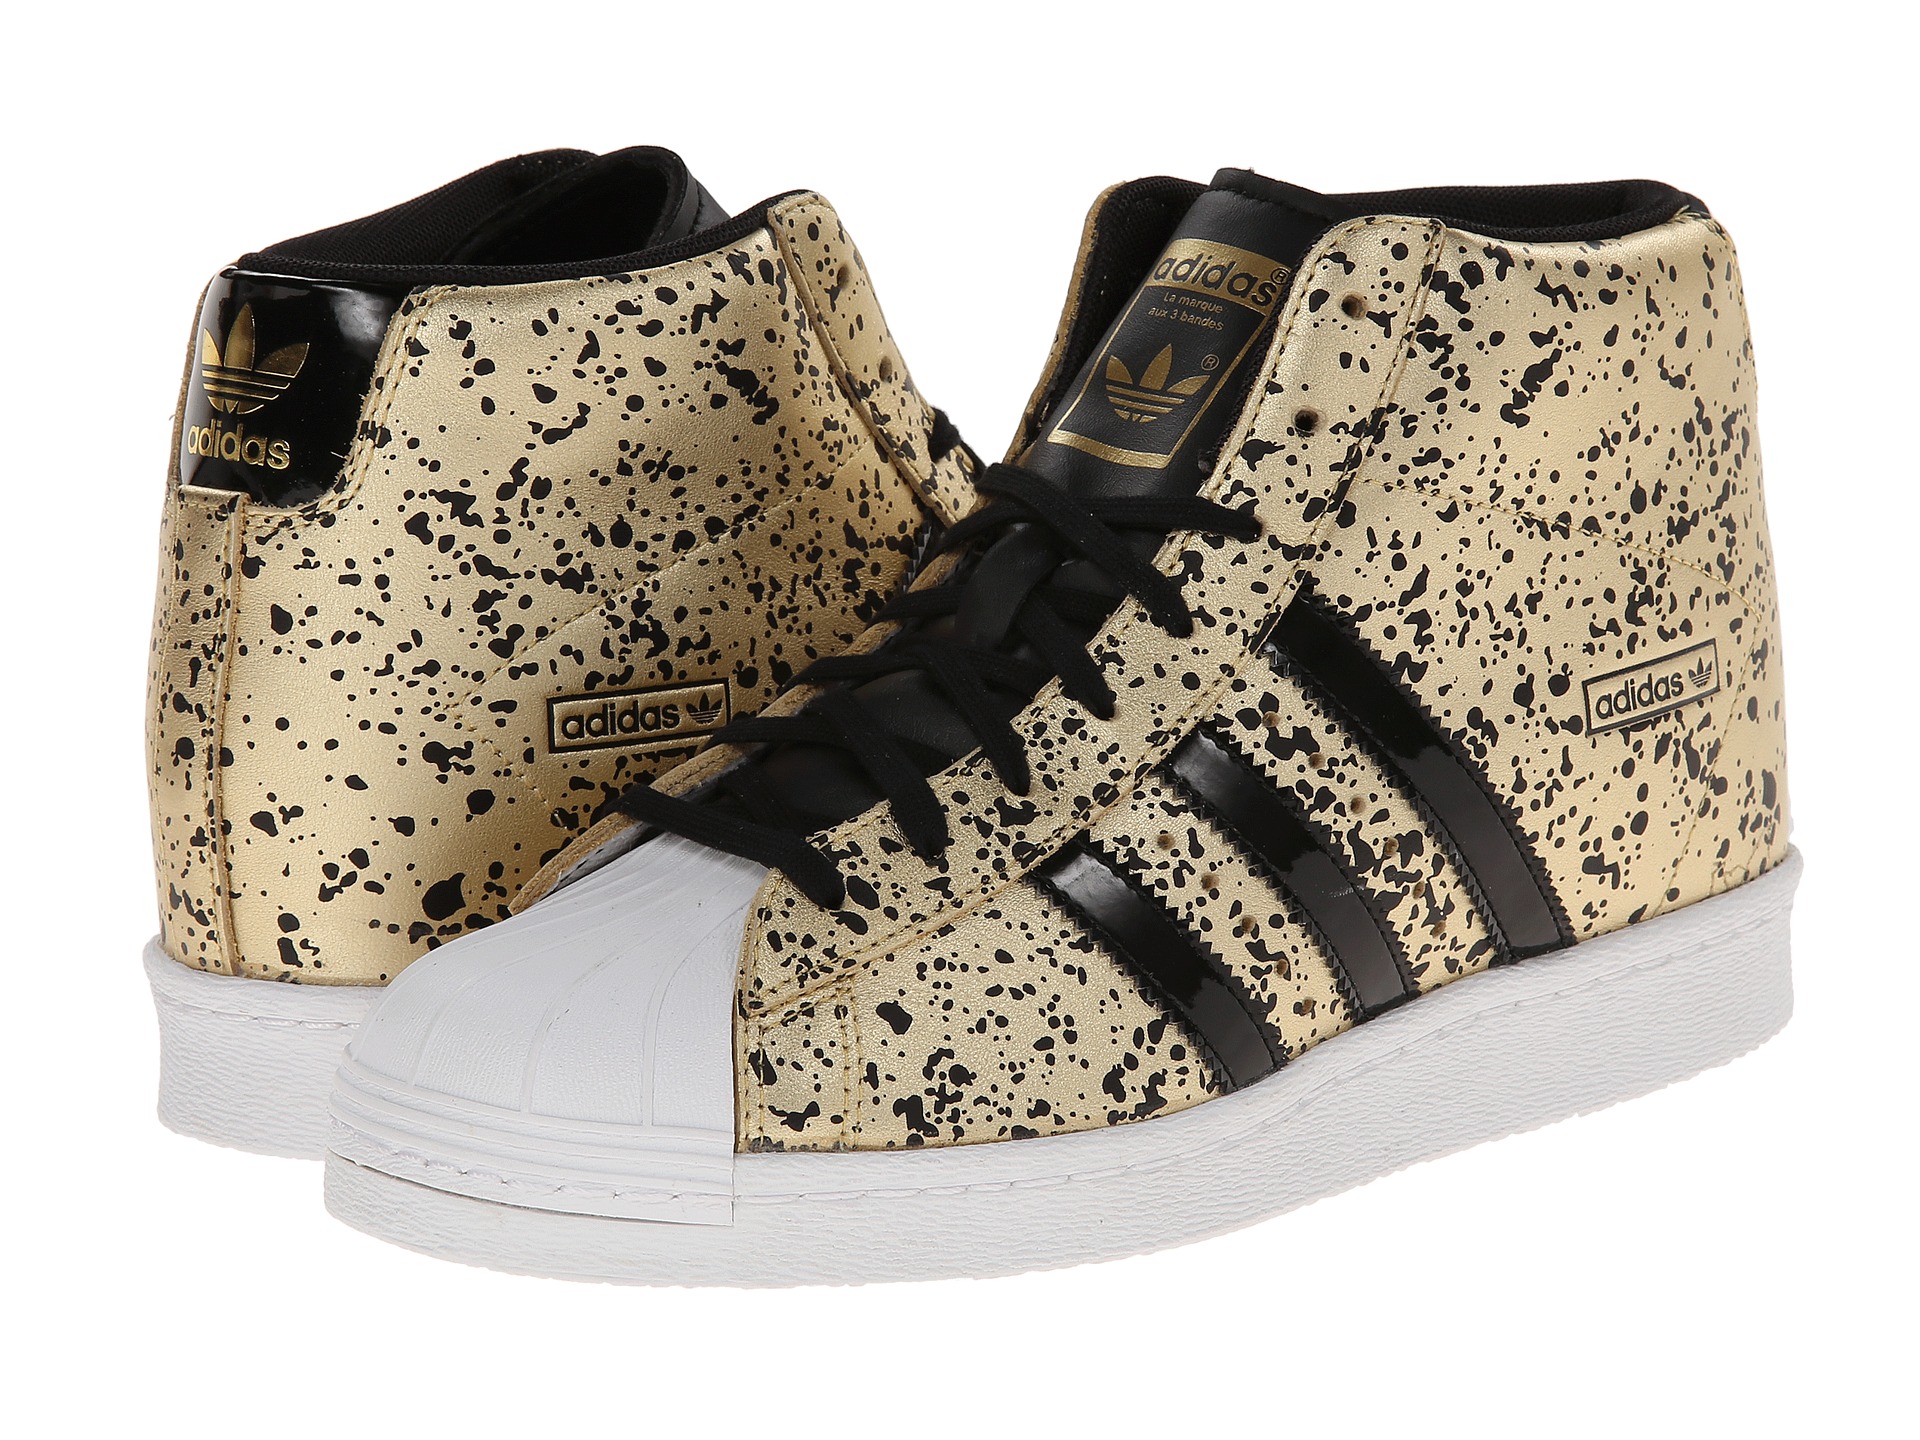 Cheap Adidas Superstar Foundation B27136 Sneakers